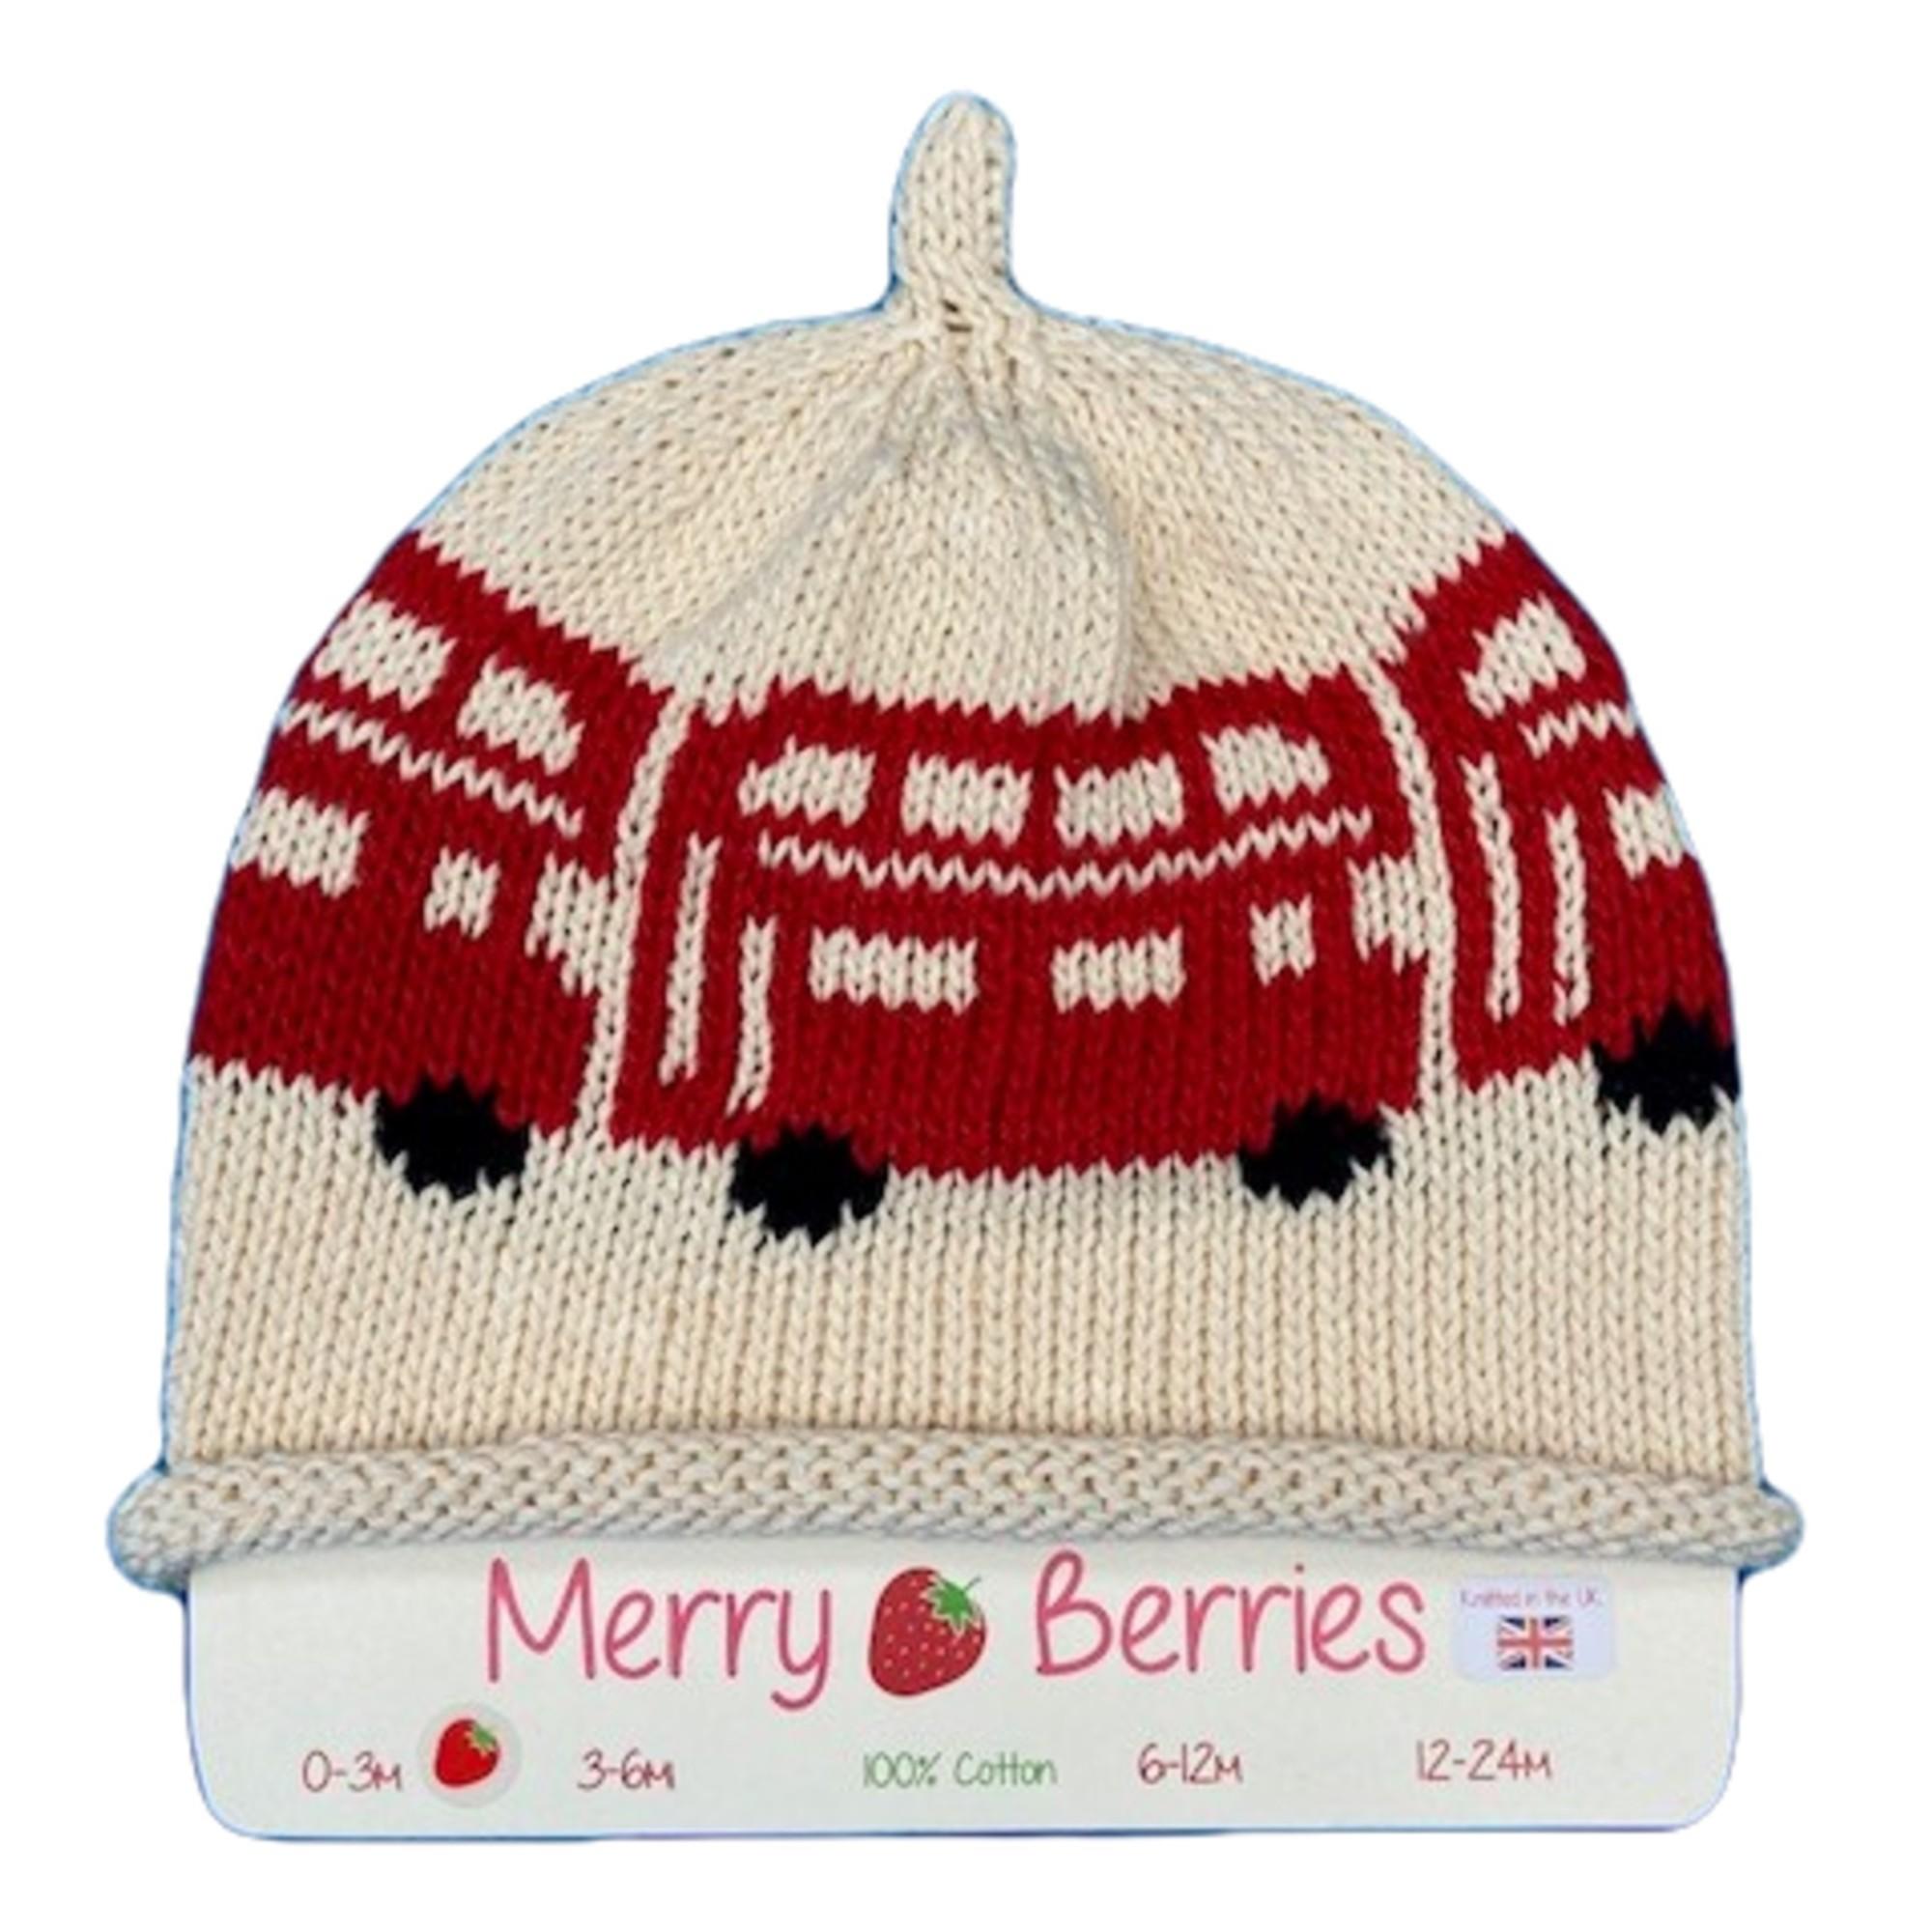 Merry Berries - London Bus Knitted baby Hat-0-24mths-Cotton